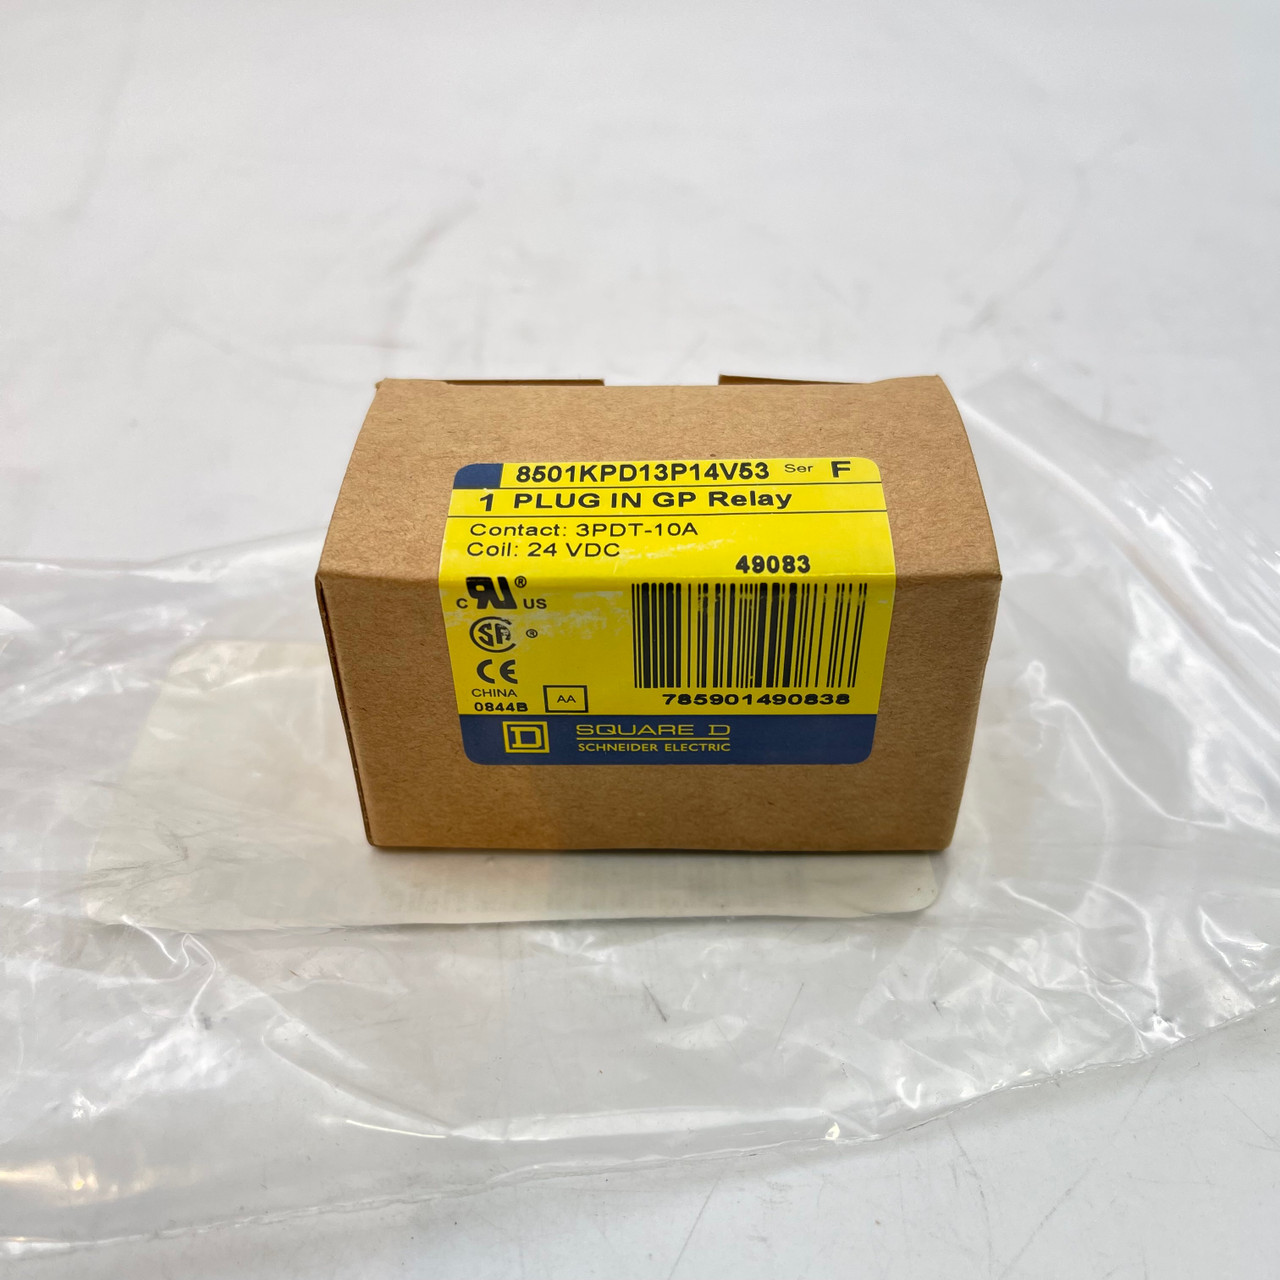 SQUARE D 8501KPD13P14V53 SERIES F PLUG IN GP RELAY 24VDC 10A - NEW